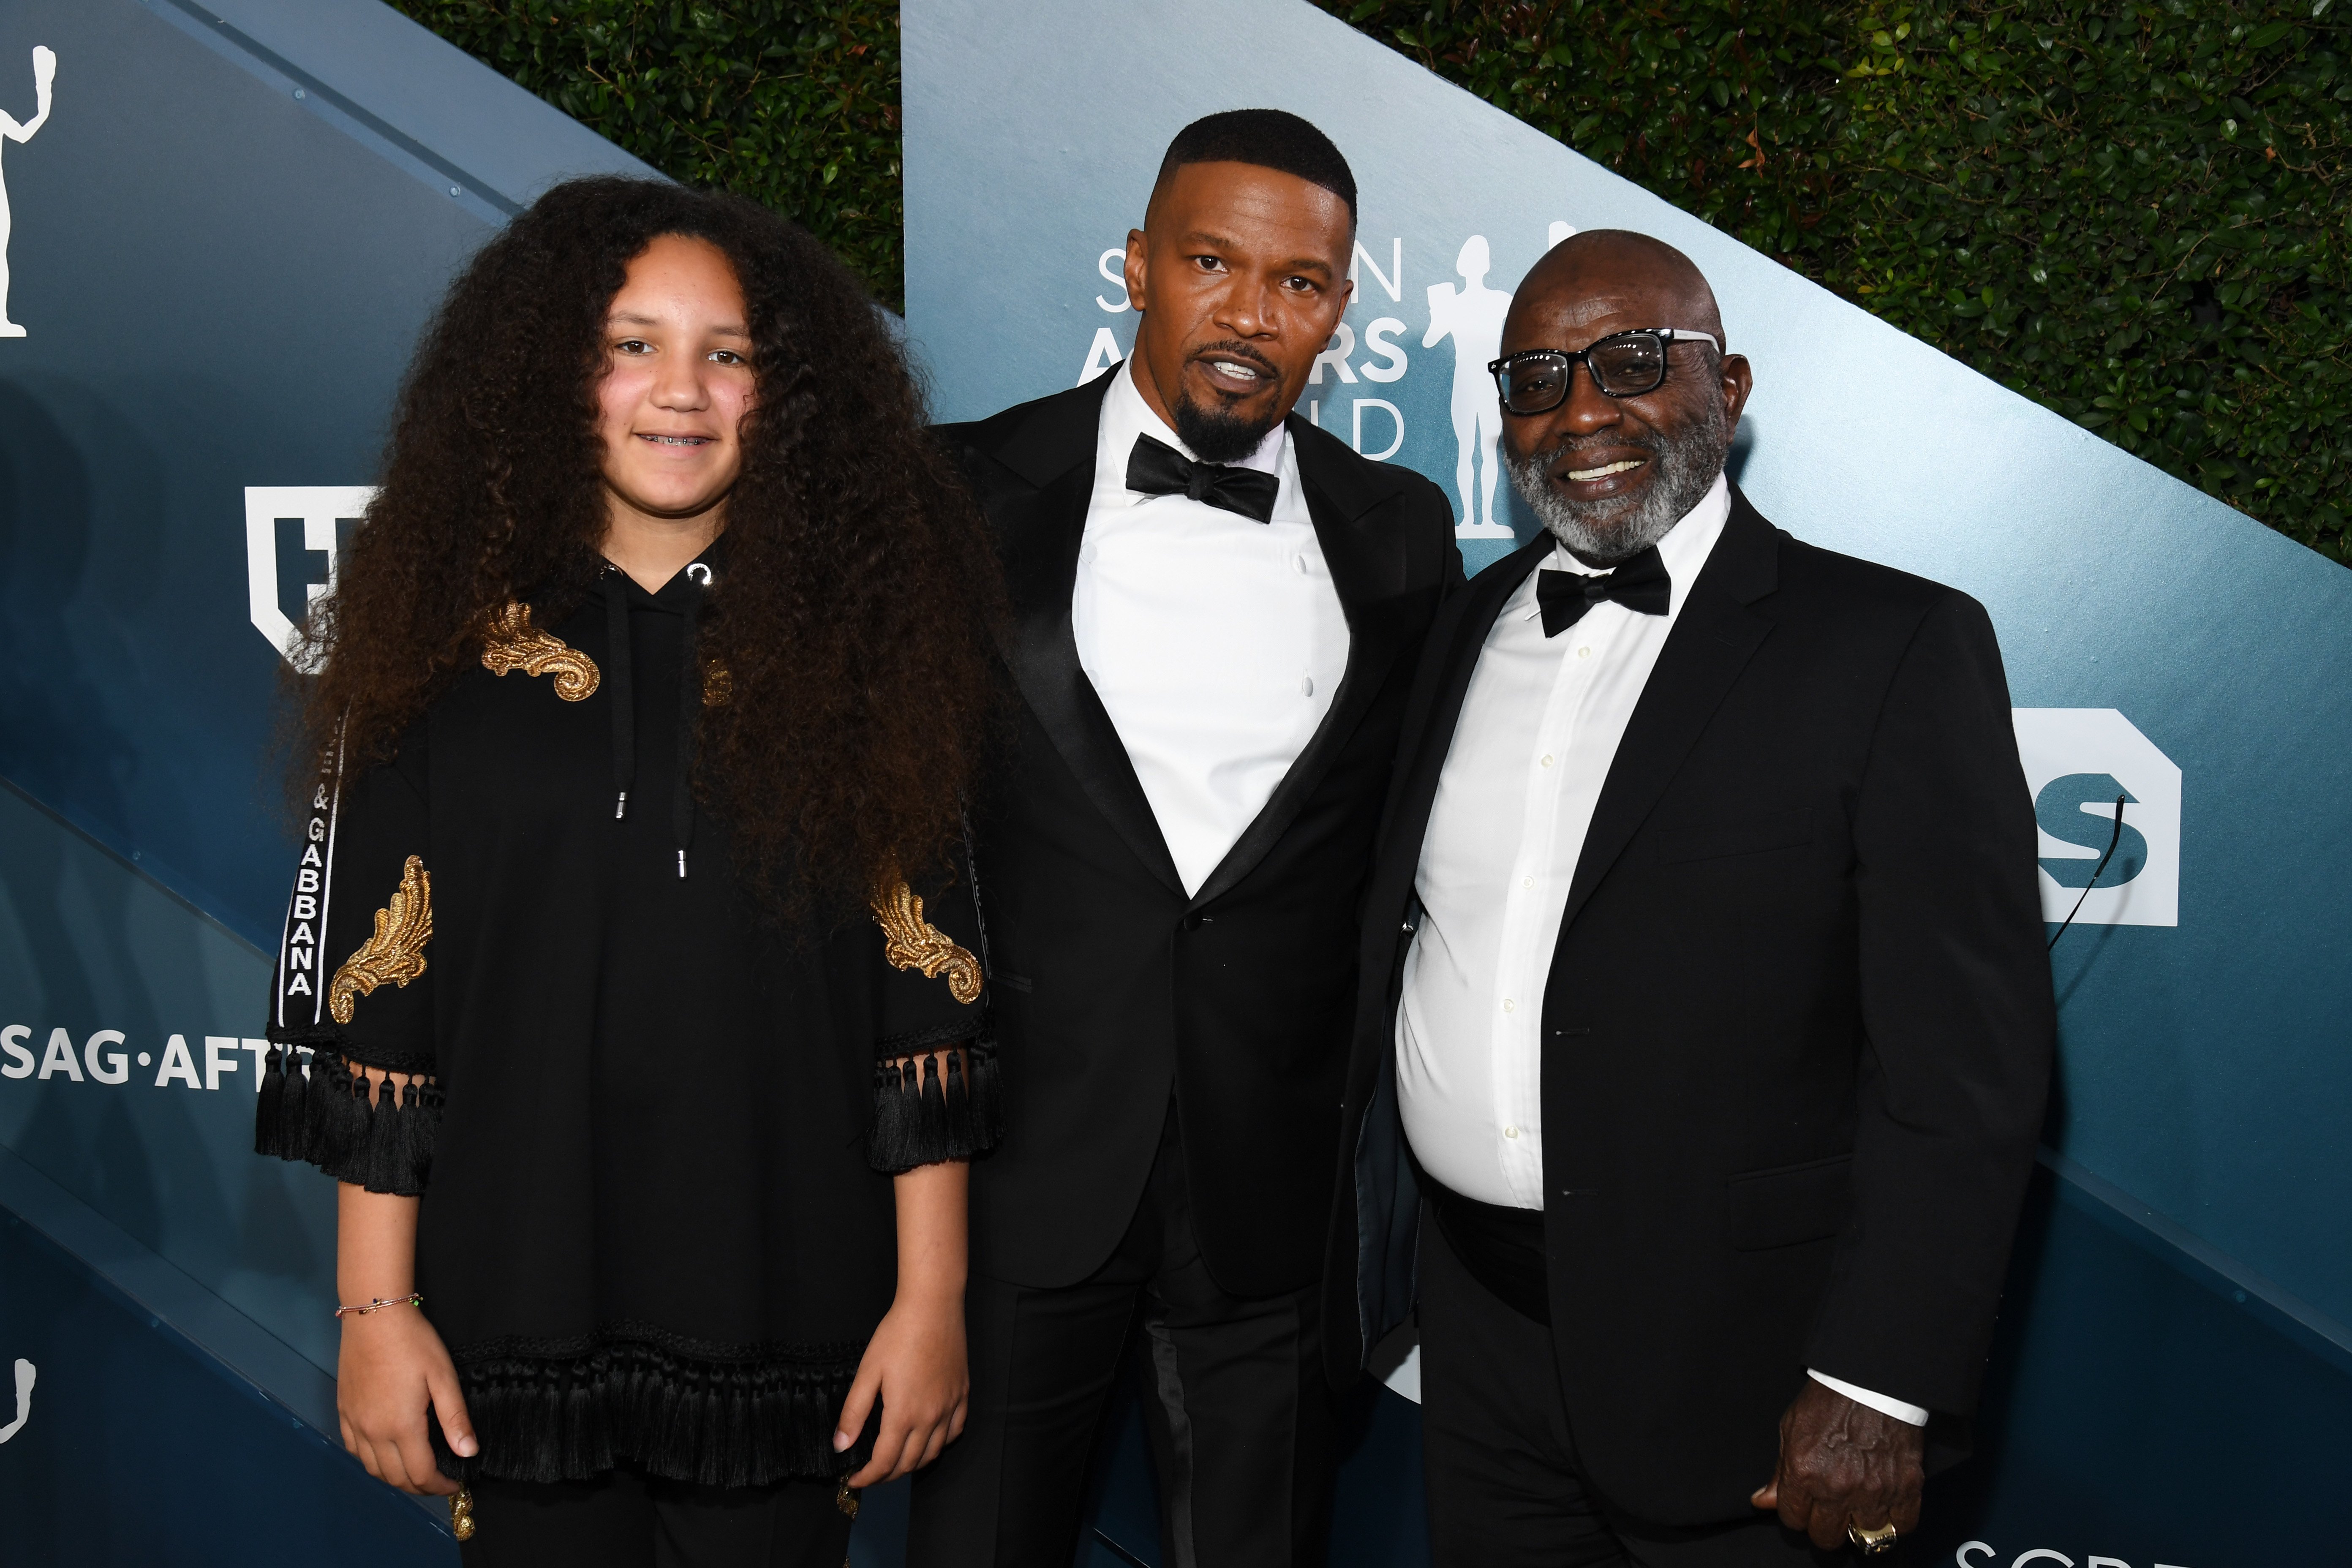 Annalise Bishop, Jamie Foxx and George Dixon attend the 26th Annual Screen Actors Guild Awards at The Shrine Auditorium on January 19, 2020 in Los Angeles, California.  | Photo: GettyImages